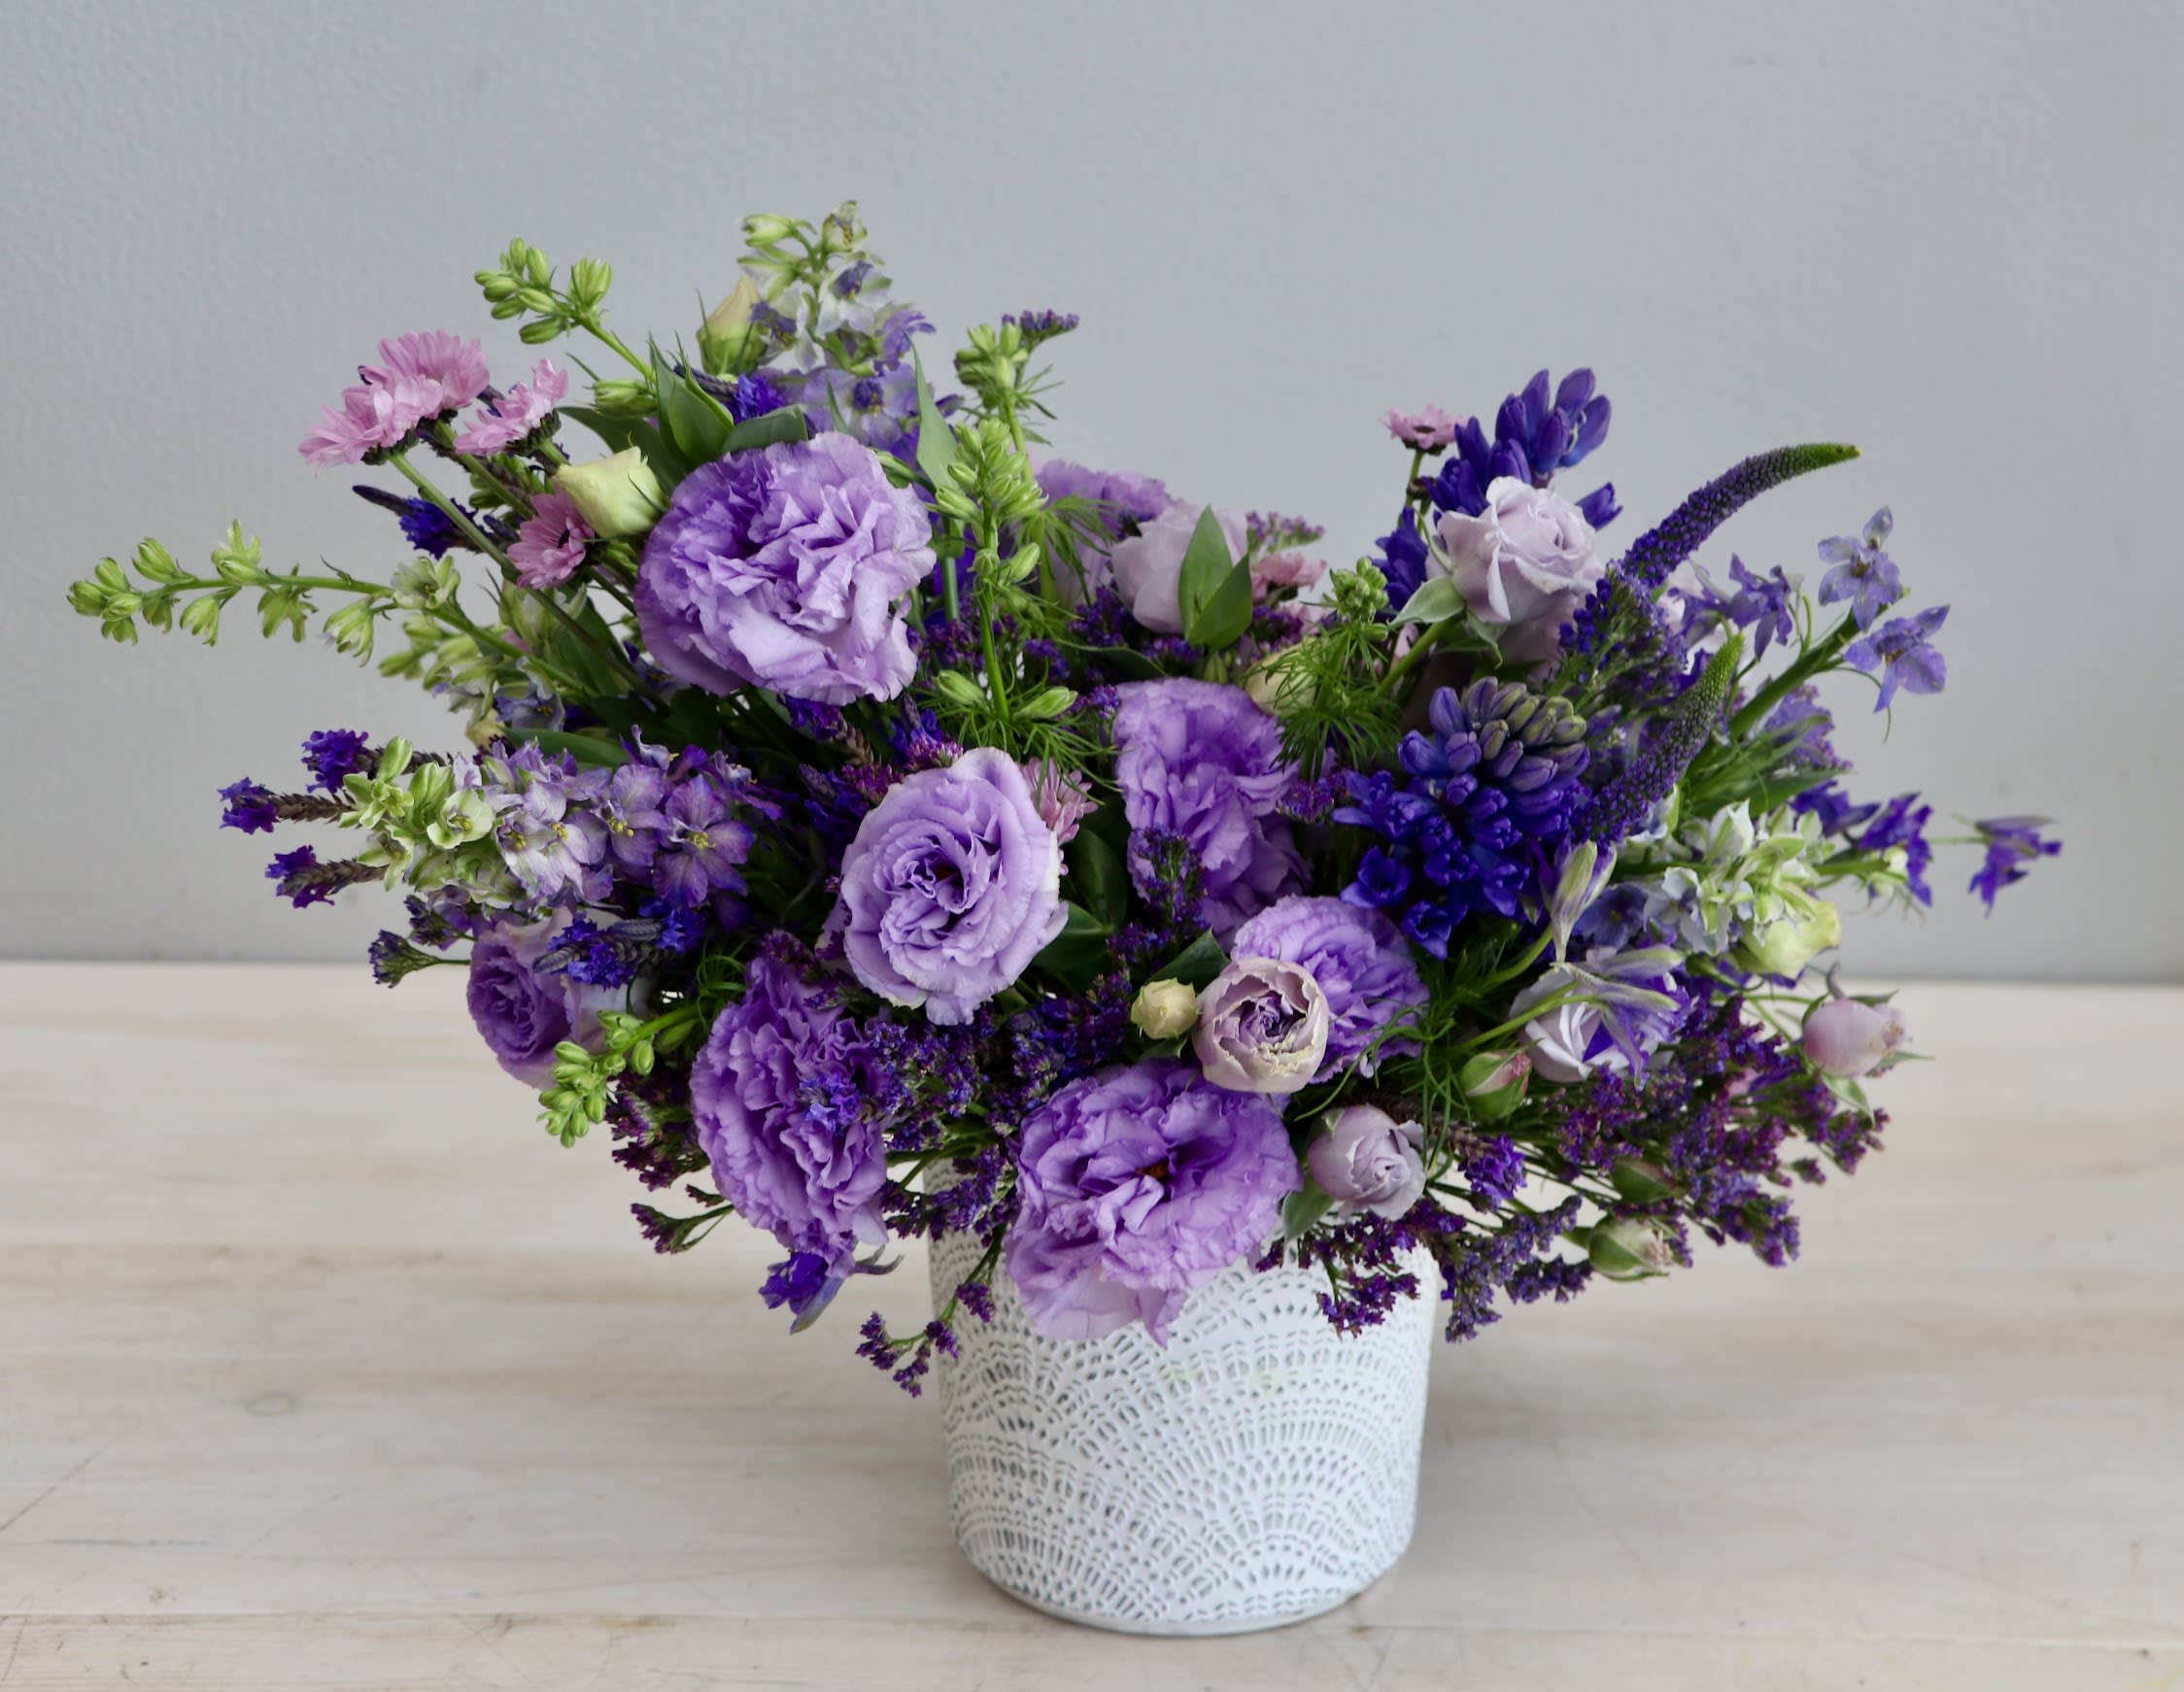 Purple Hues - My Glendale Florist  - Lisianthus is a delicate, pastel-colored flower known for its romantic appearance and long-lasting bloom as a cut flower.